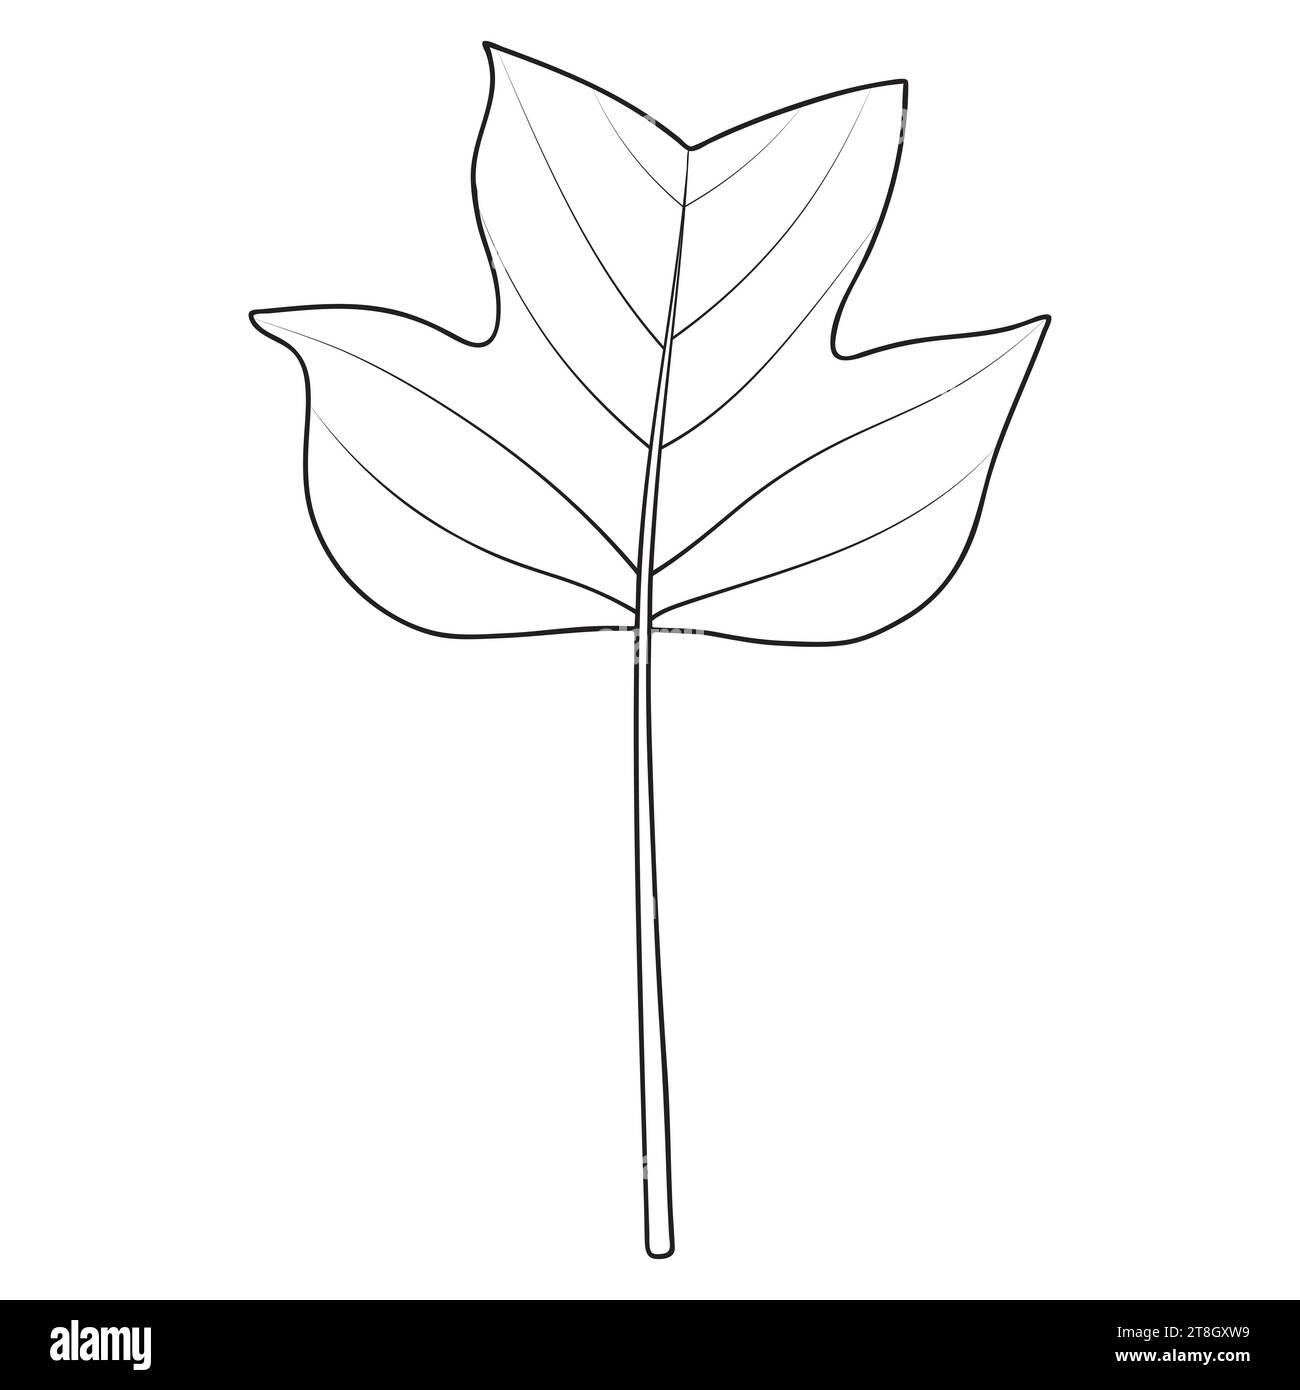 Tulip poplar or tulip tree leaf outline, vector botanical illustration. Large broad Liriodendron tulipifera leaf. Coloring book page. Stock Vector